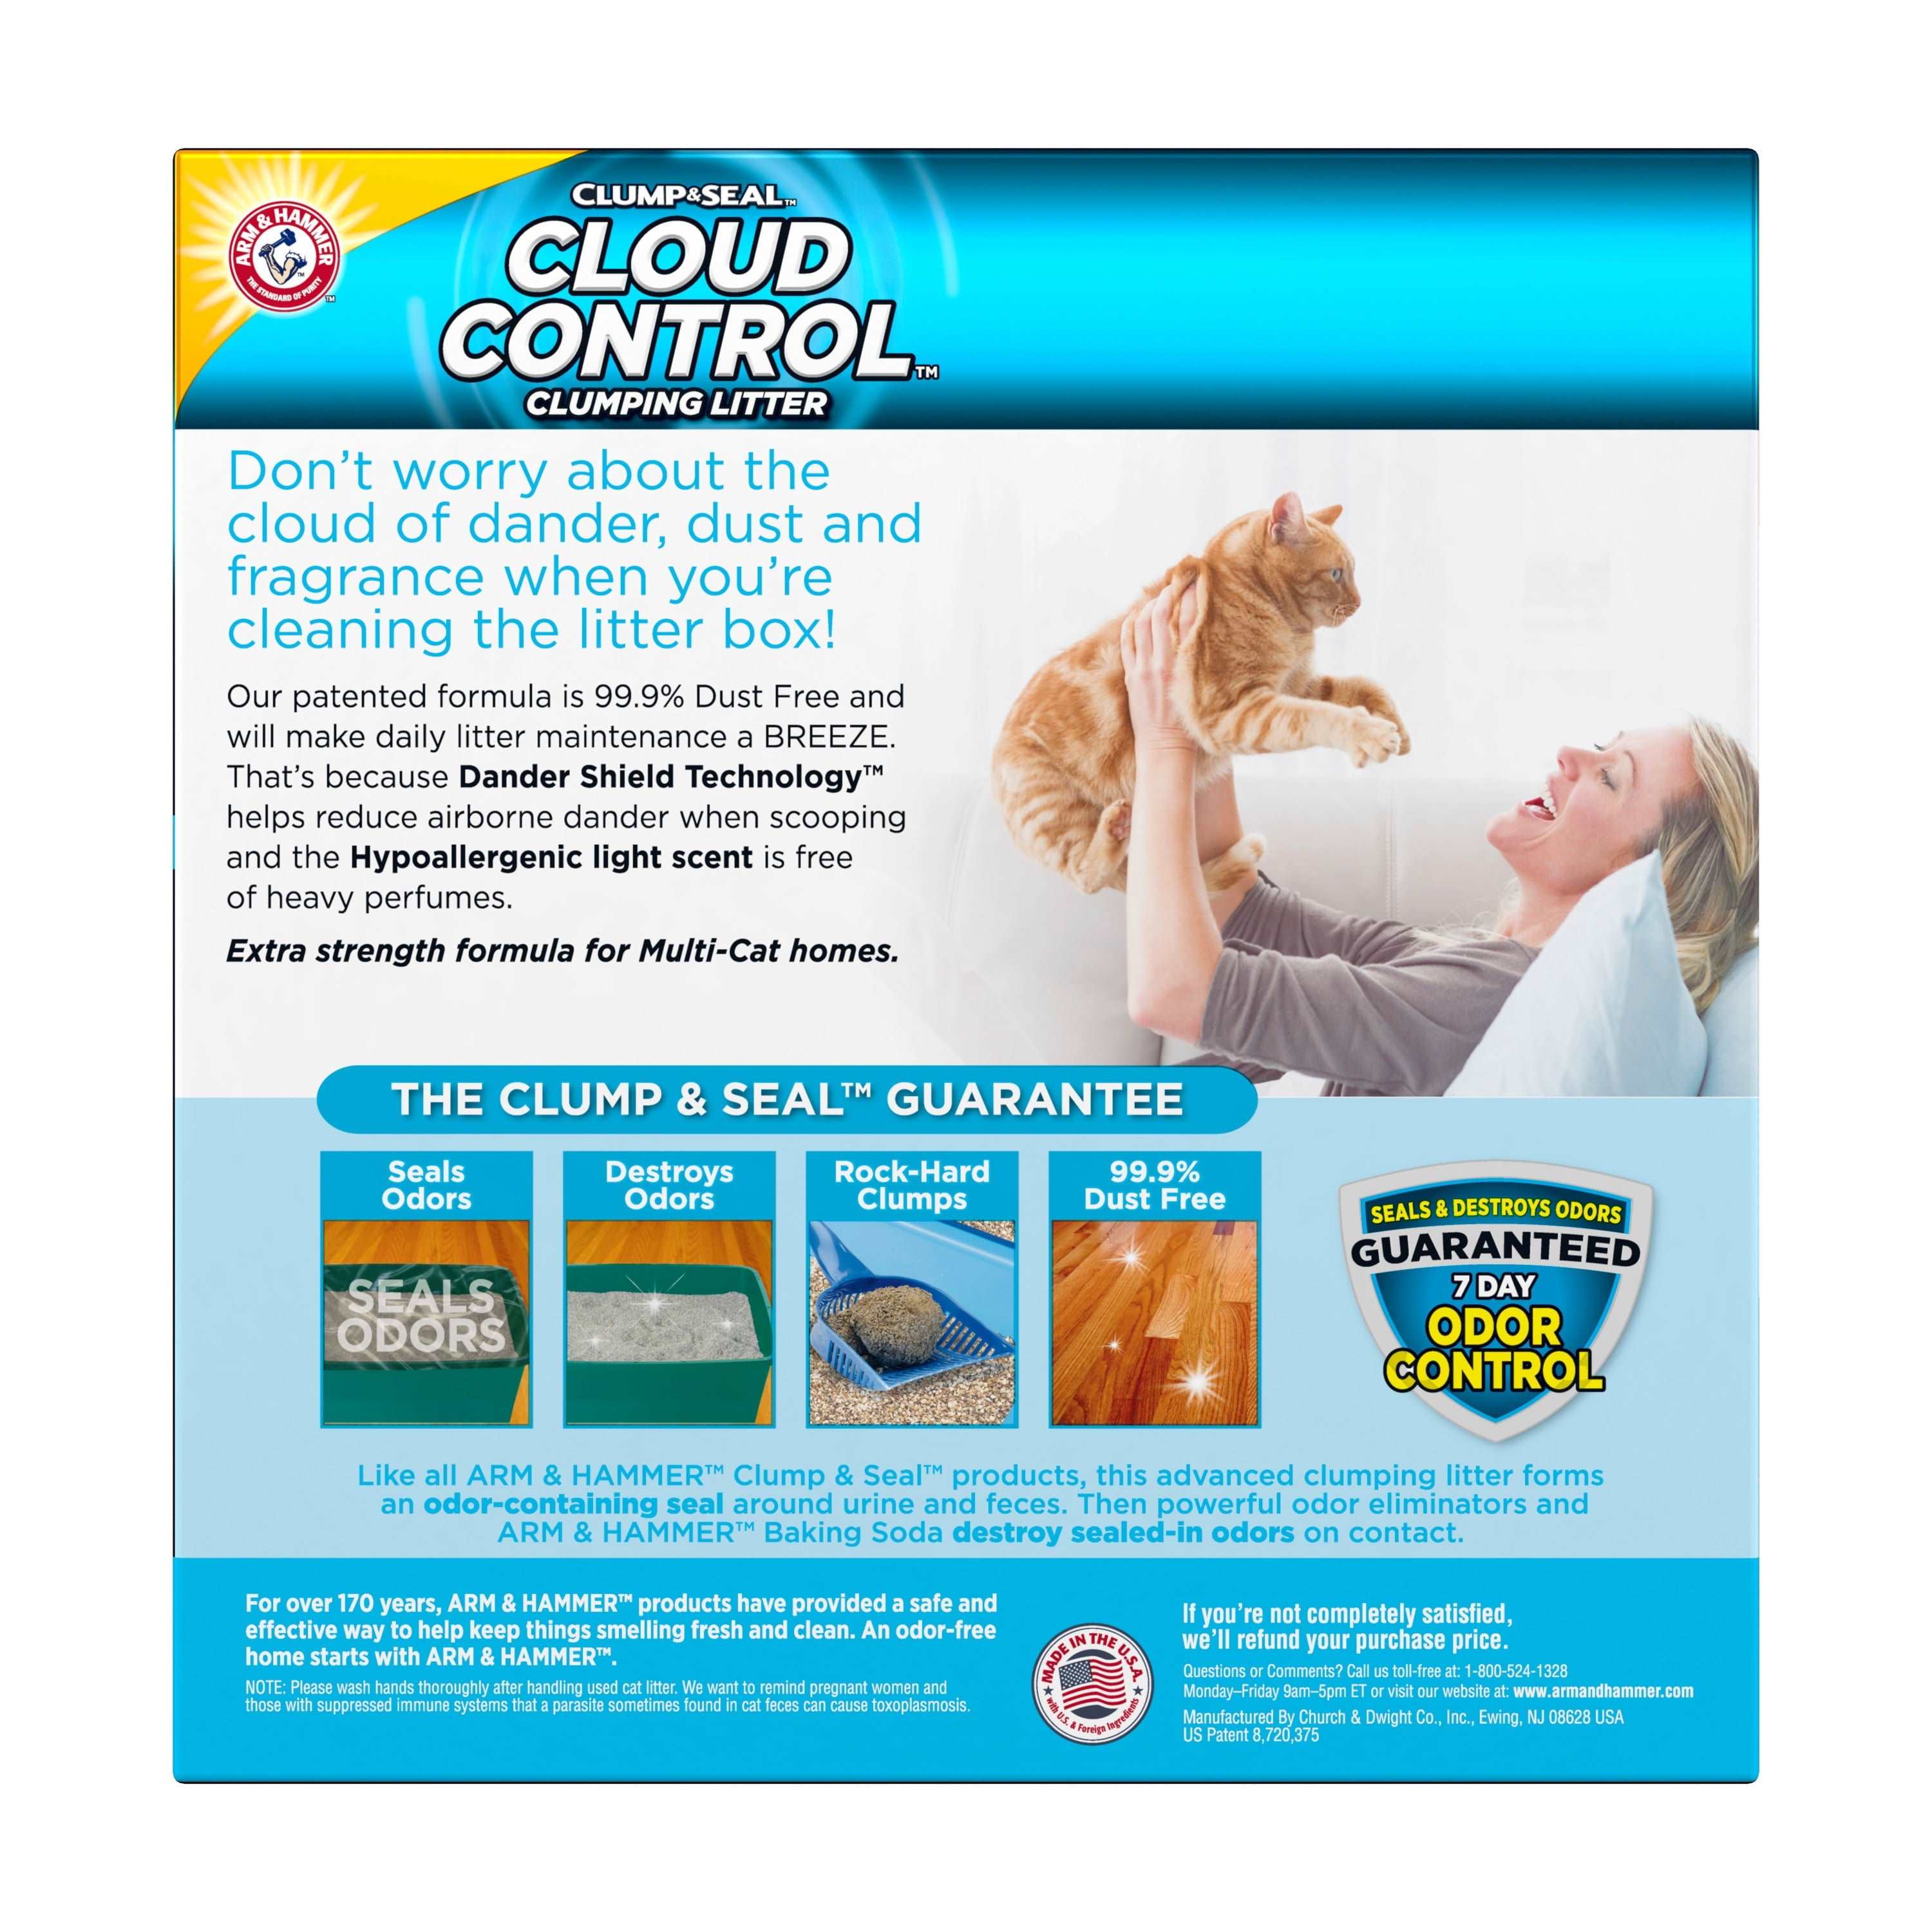 Wholesale prices with free shipping all over United States Arm & Hammer Cloud Control Multi-Cat Clumping Cat Litter with Hypoallergenic Light Scent, 14lb - Steven Deals